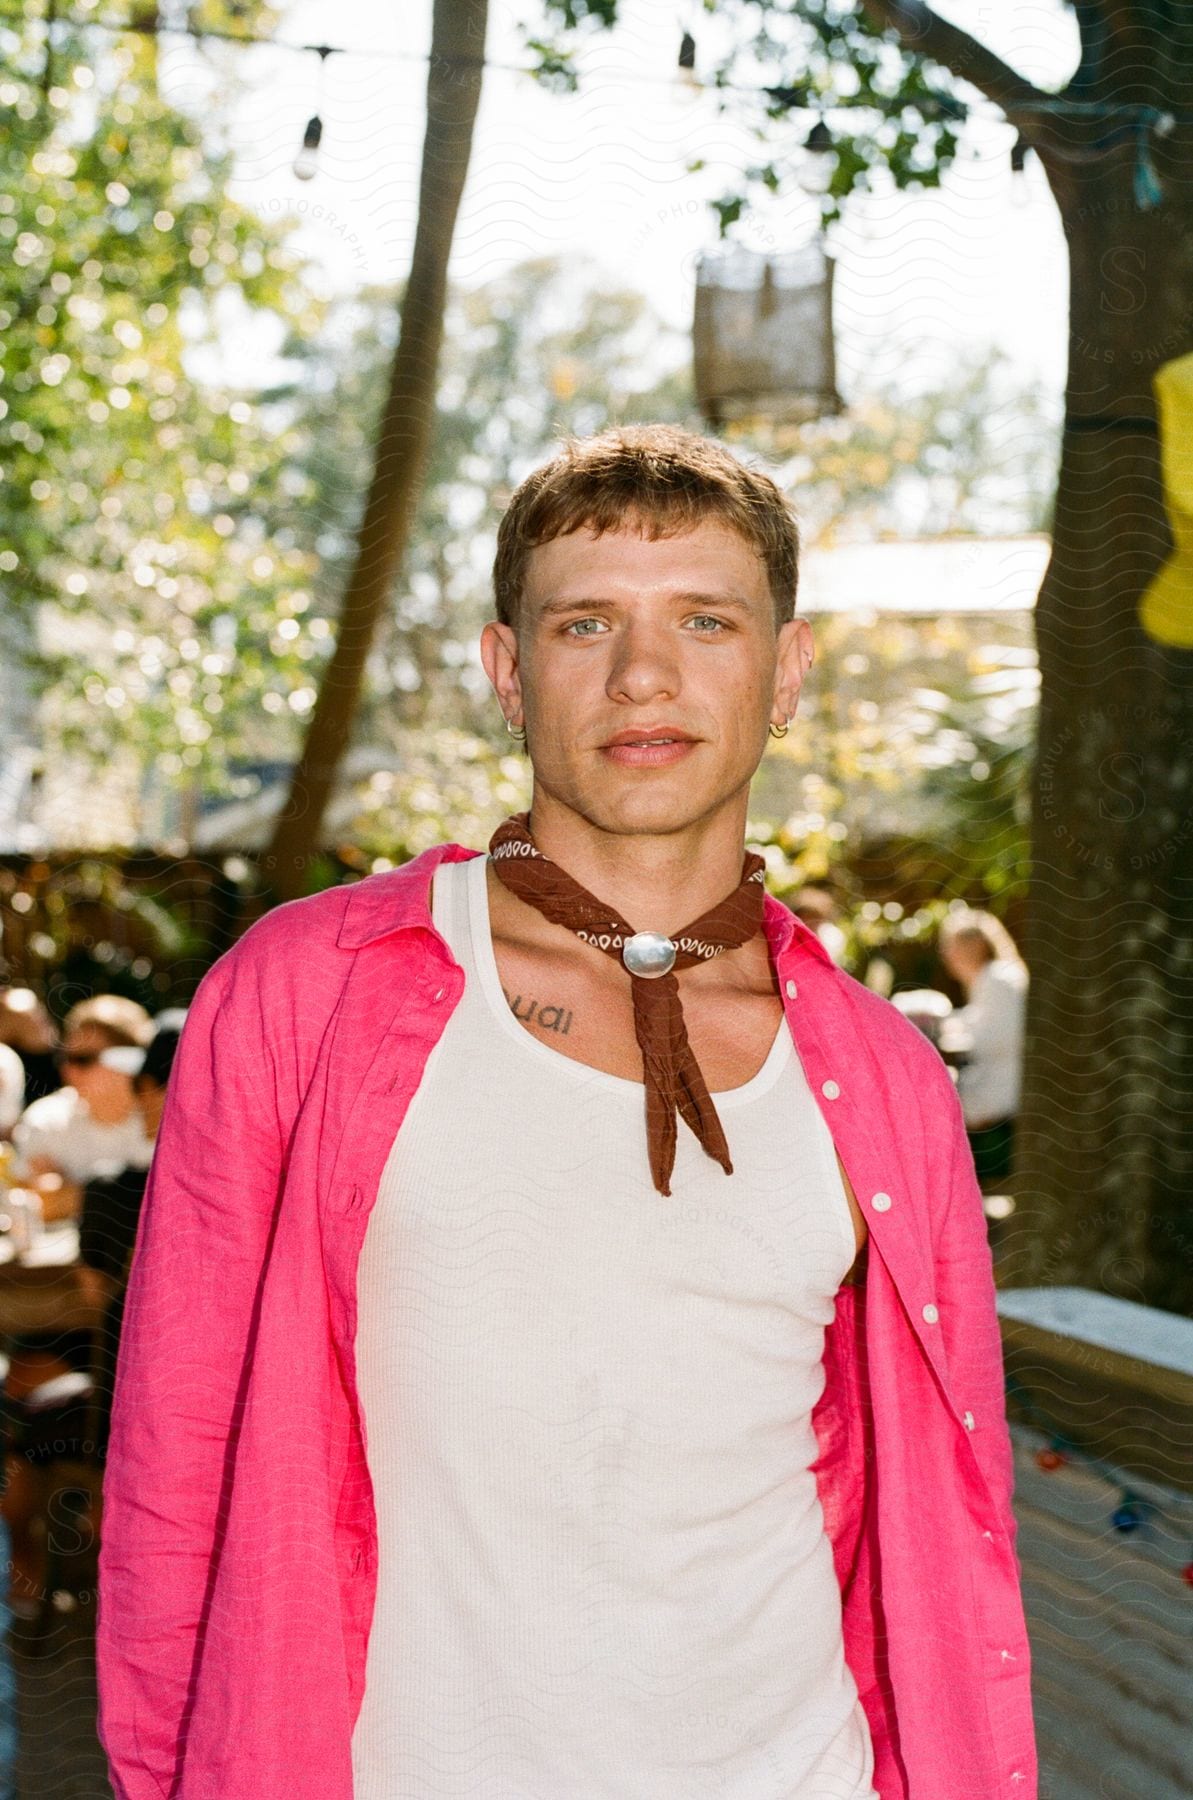 A portrait shot of a male model in a pink shirt